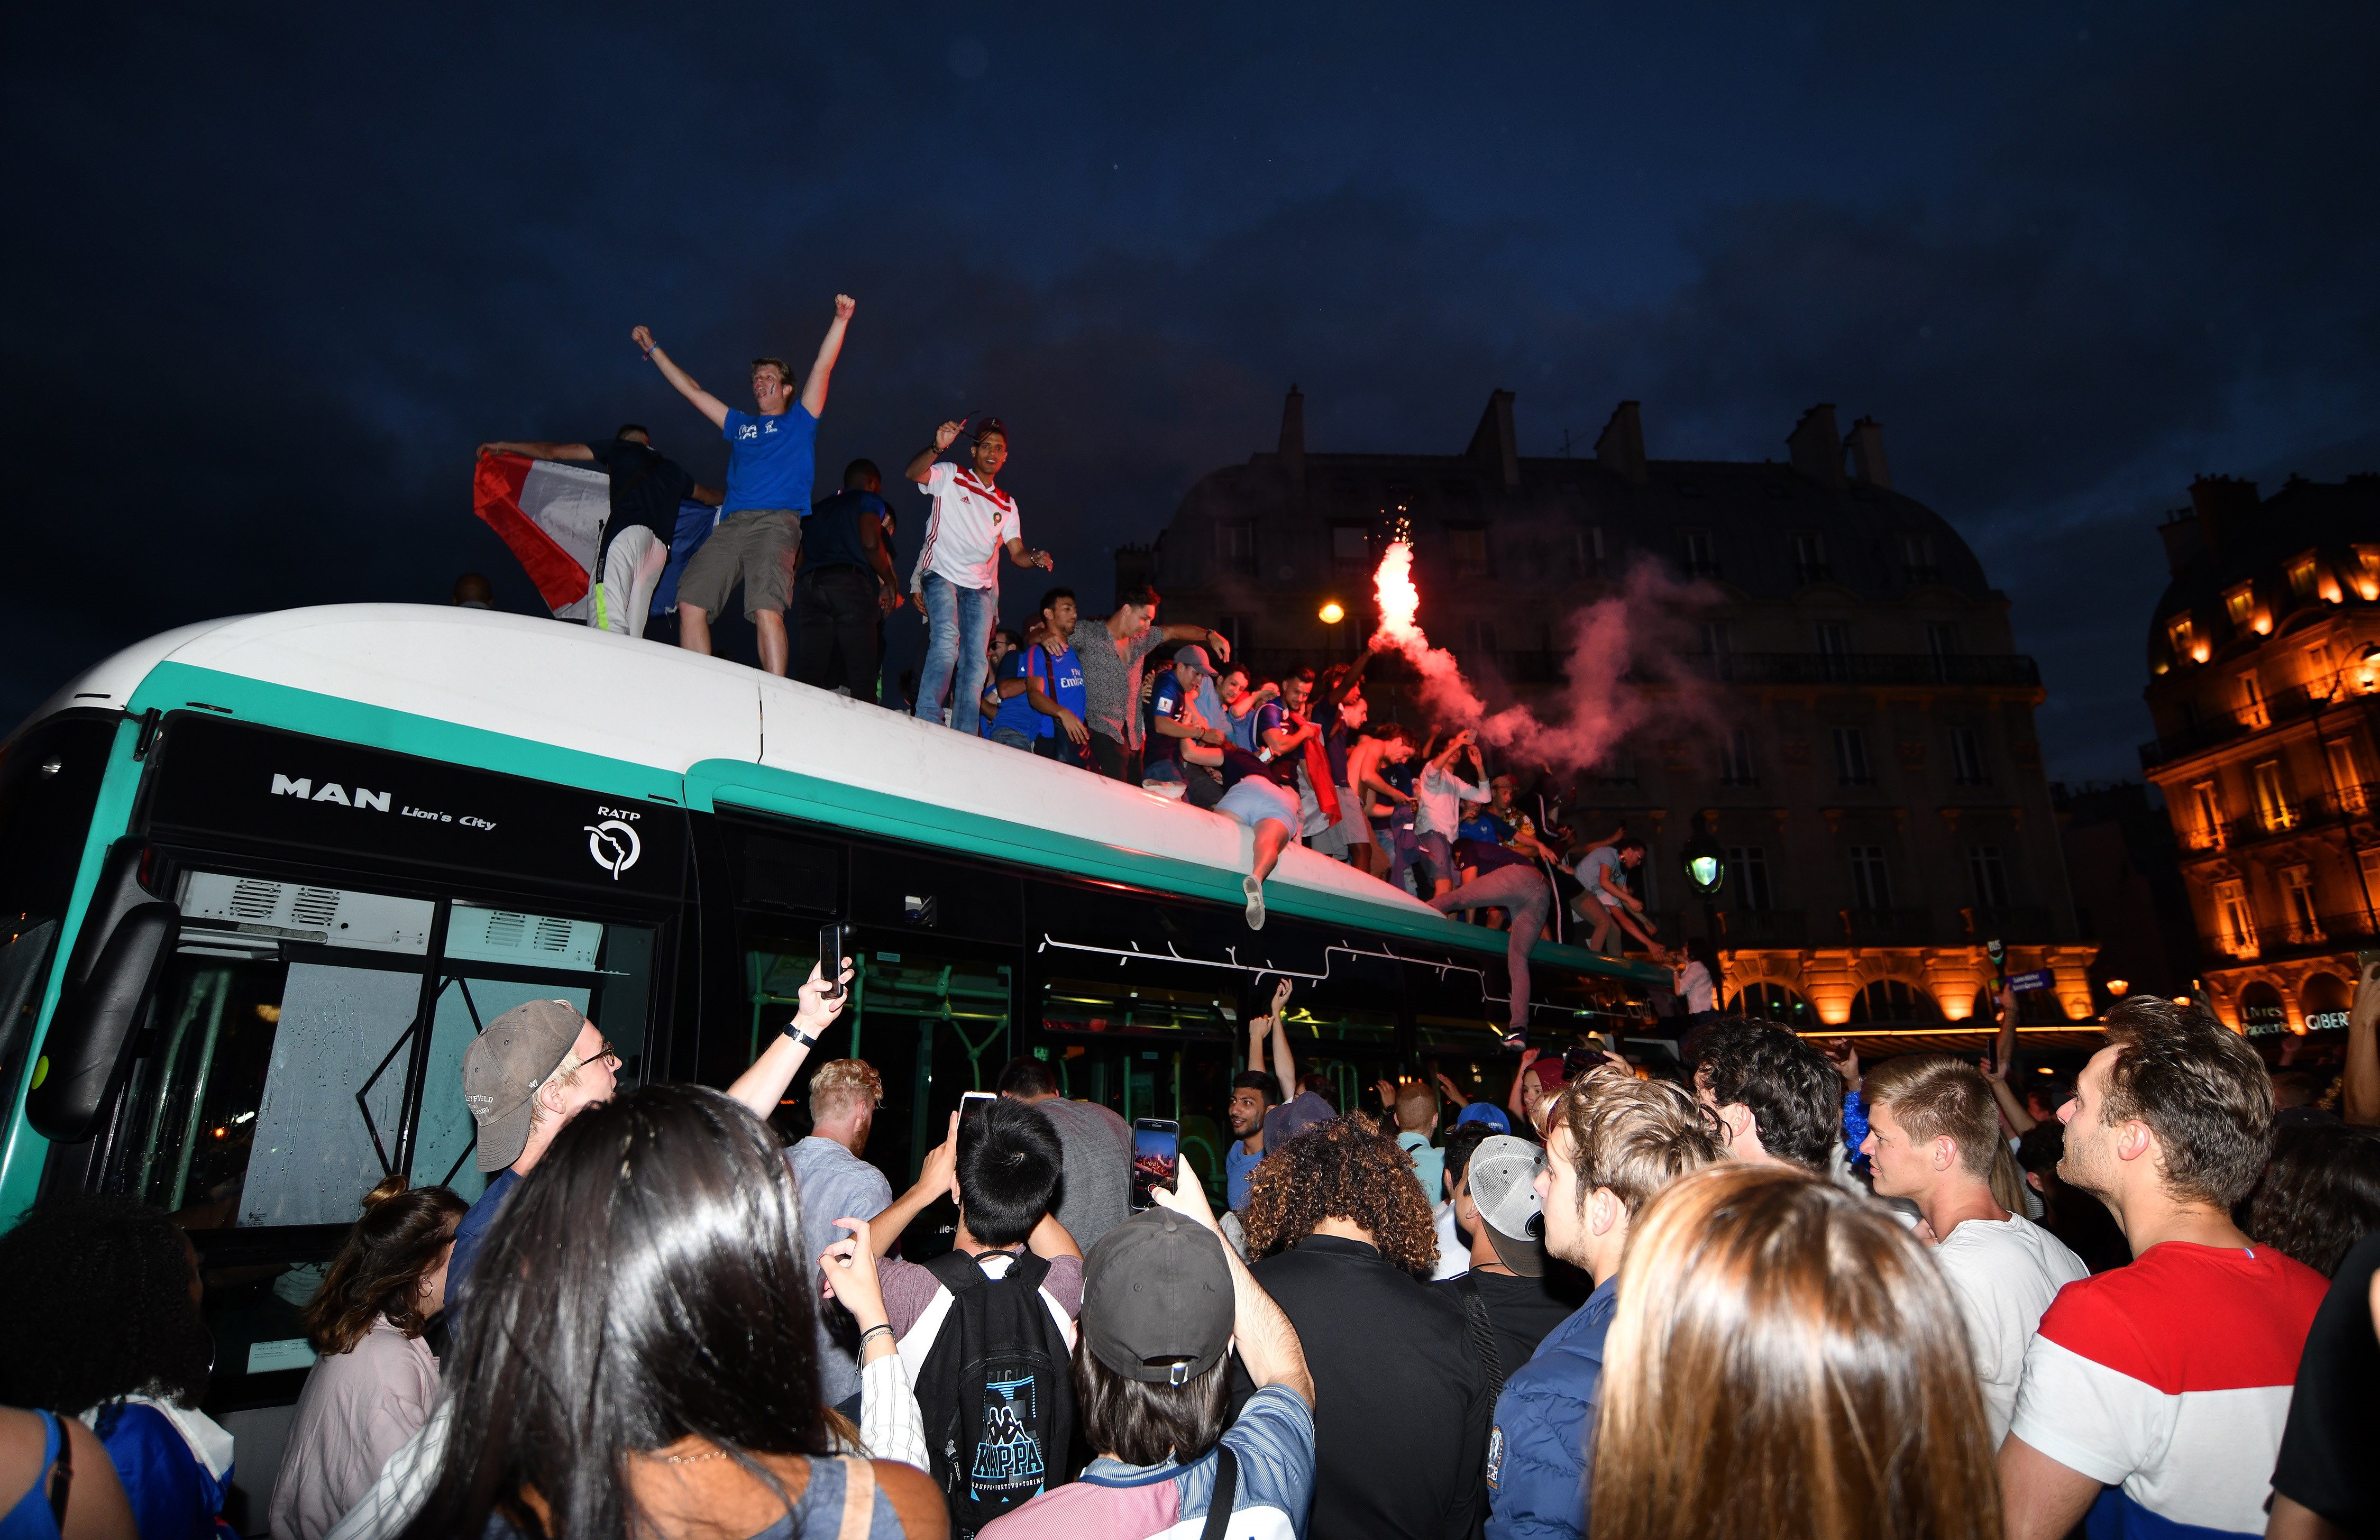 PARIS, FRANCE - JULY 10: Supporters of France football national team celebrate their team's victory against Belgium of the semifinal match in the FIFA 2018 World Cup, on top of a public bus at Place Saint-Michel in Paris, France on July 10, 2018. (Photo by Mustafa Yalcin/Anadolu Agency/Getty Images)